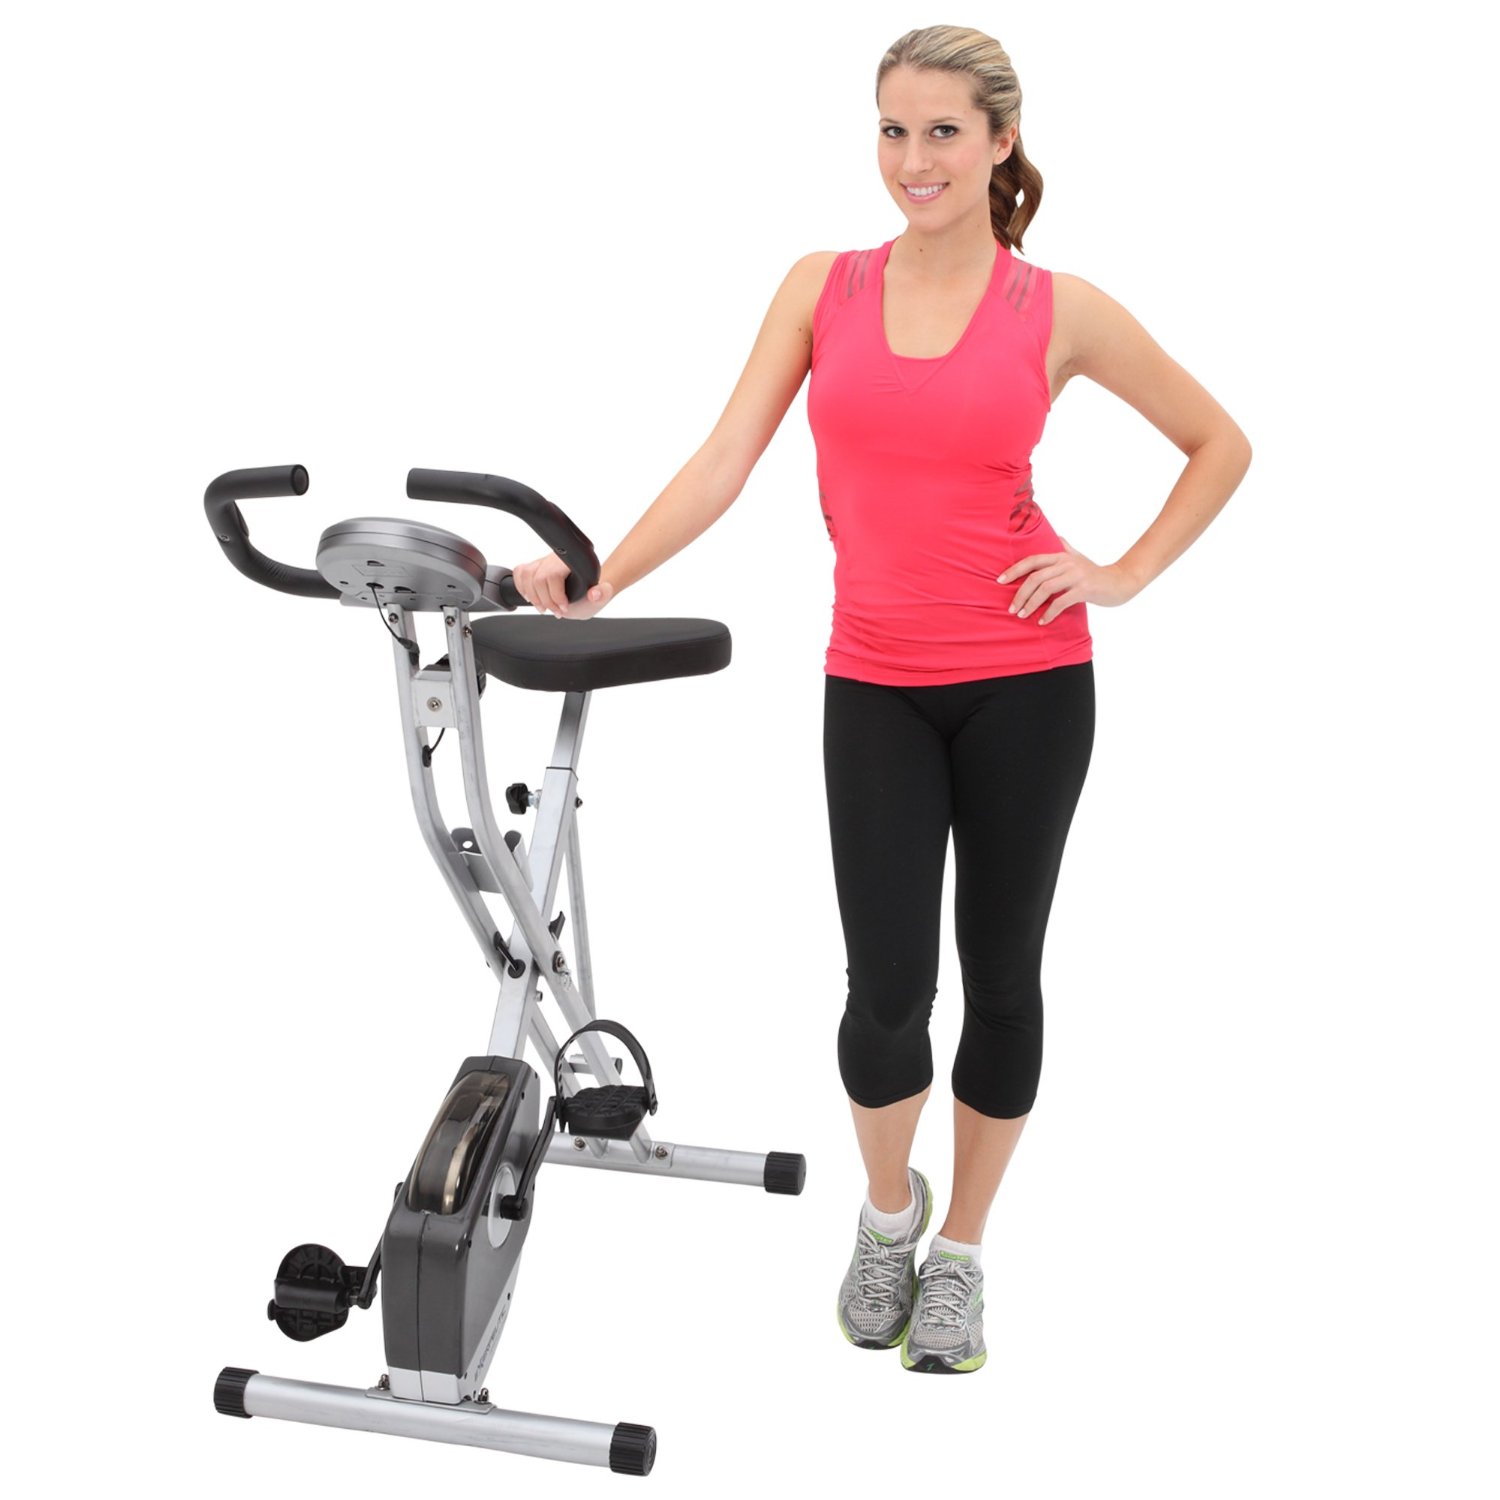 Top 10 Best Exercise Bikes in 2017 Reviews